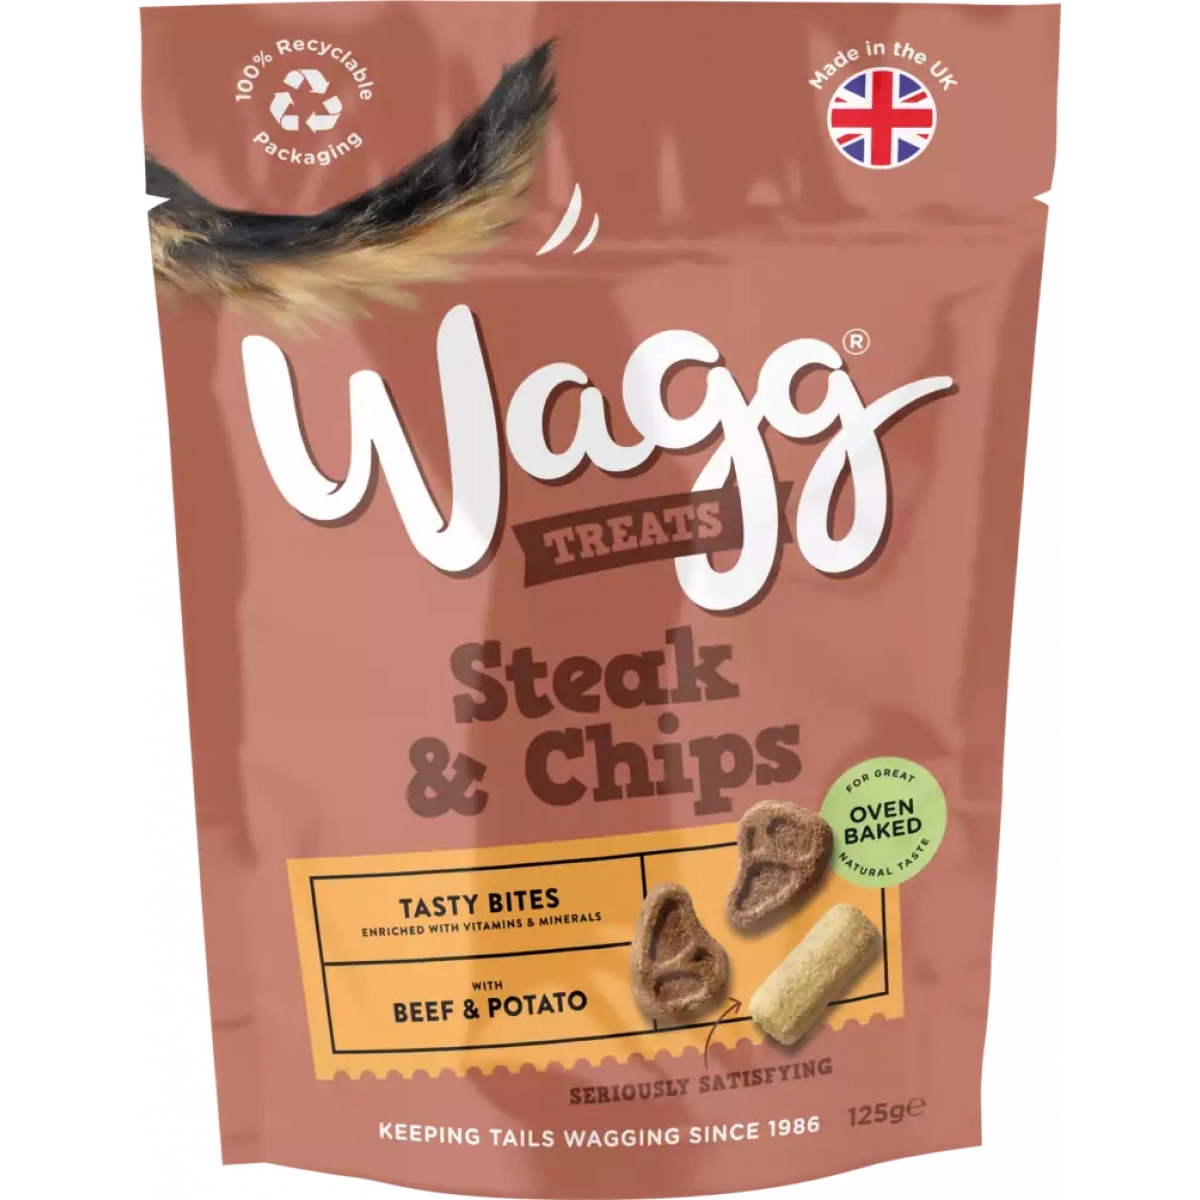 Wagg Steak & Chips Tasty Bites 125g – Pawfect Supplies Ltd Product Image